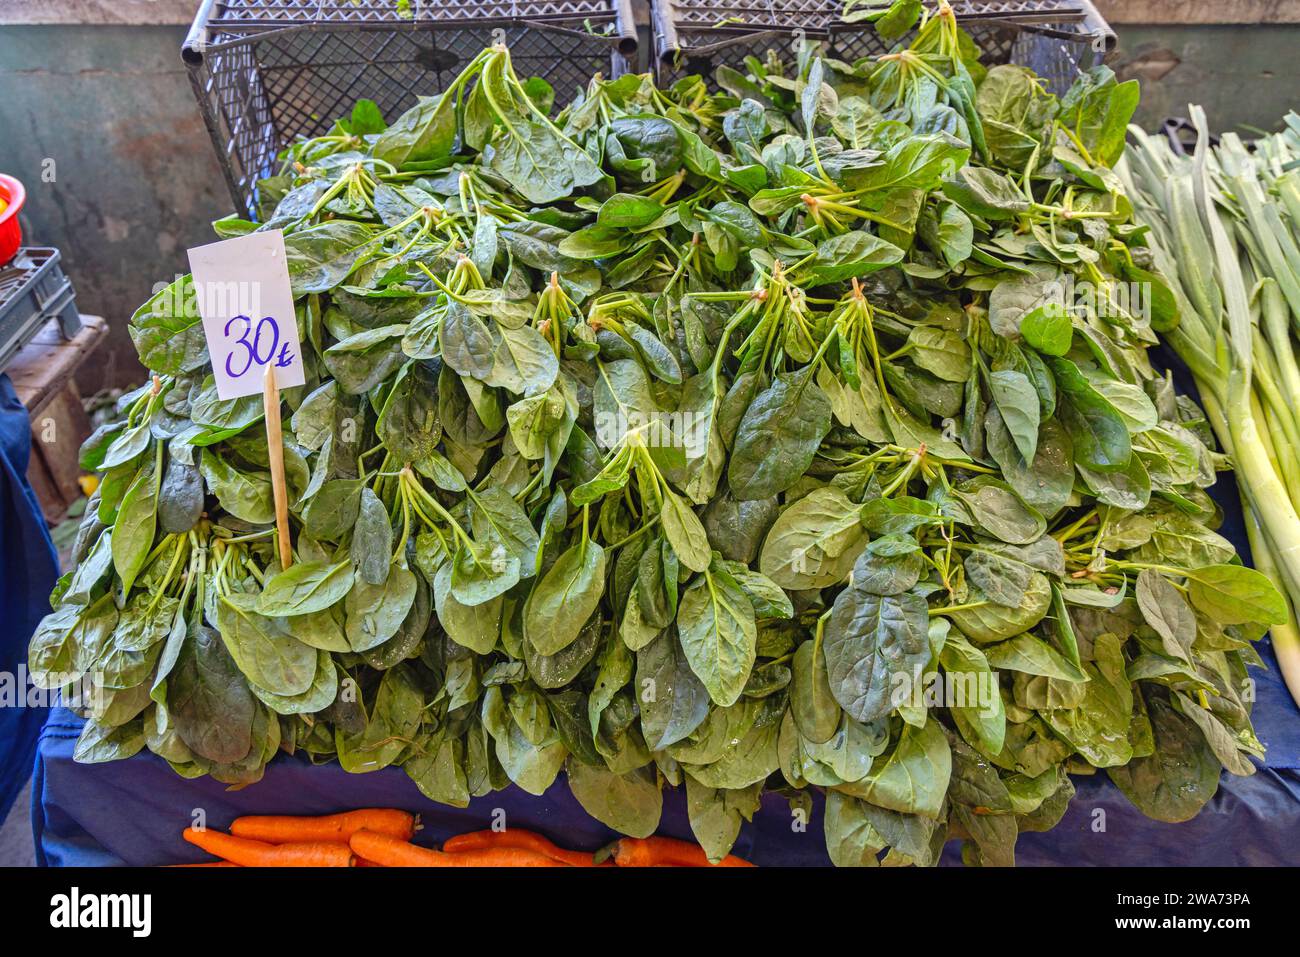 Large Pile of Spinach Leafy Greens Vegetable at Farmers Market Stock Photo